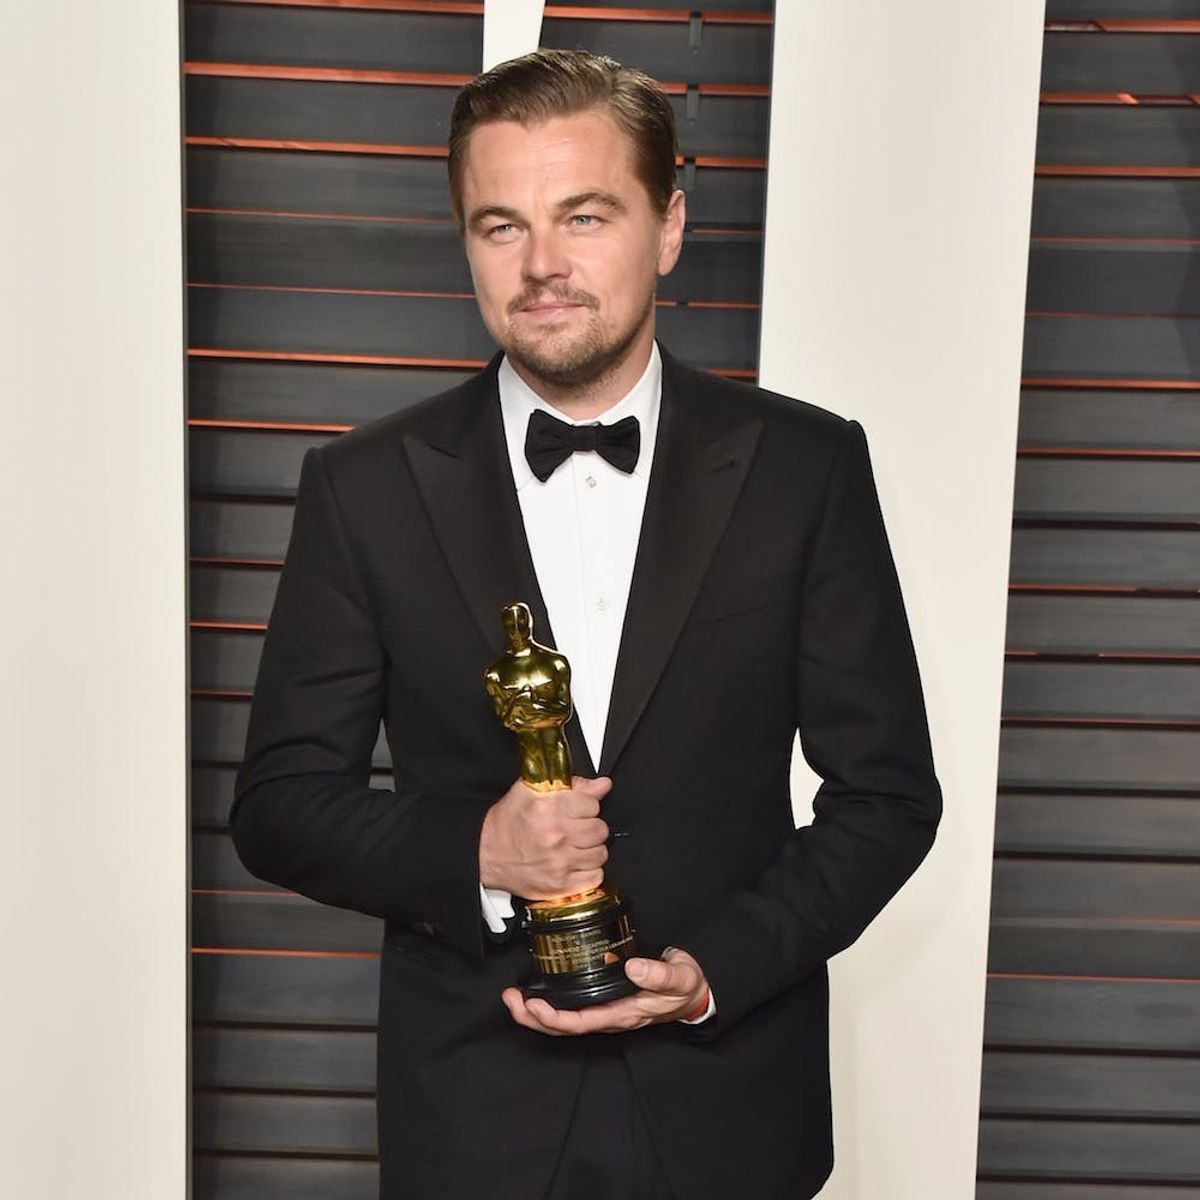 Morning Buzz! Leo Patiently Waiting for His Oscar to Get Engraved Is Freakin’ Adorable + More